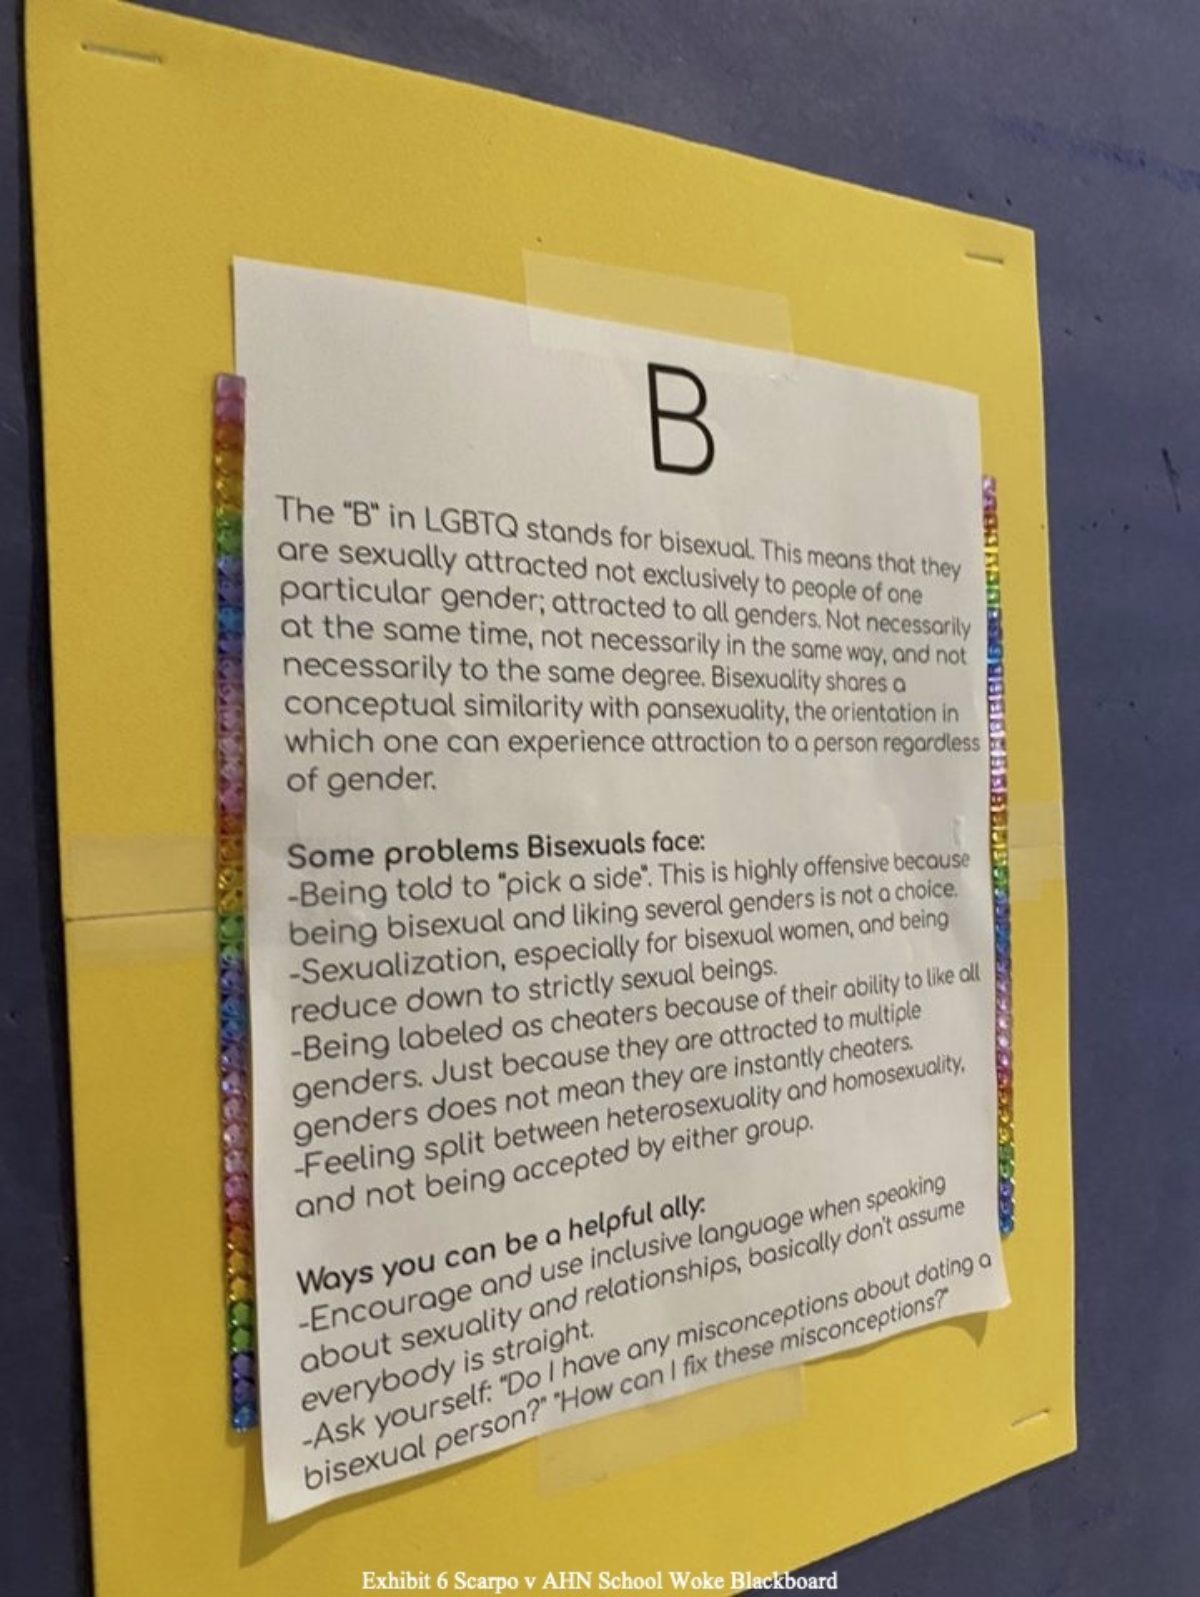 “B” poster on display at the Academy of the Holy Names. Courtesy of Adam Levine from the lawsuit exhibits.